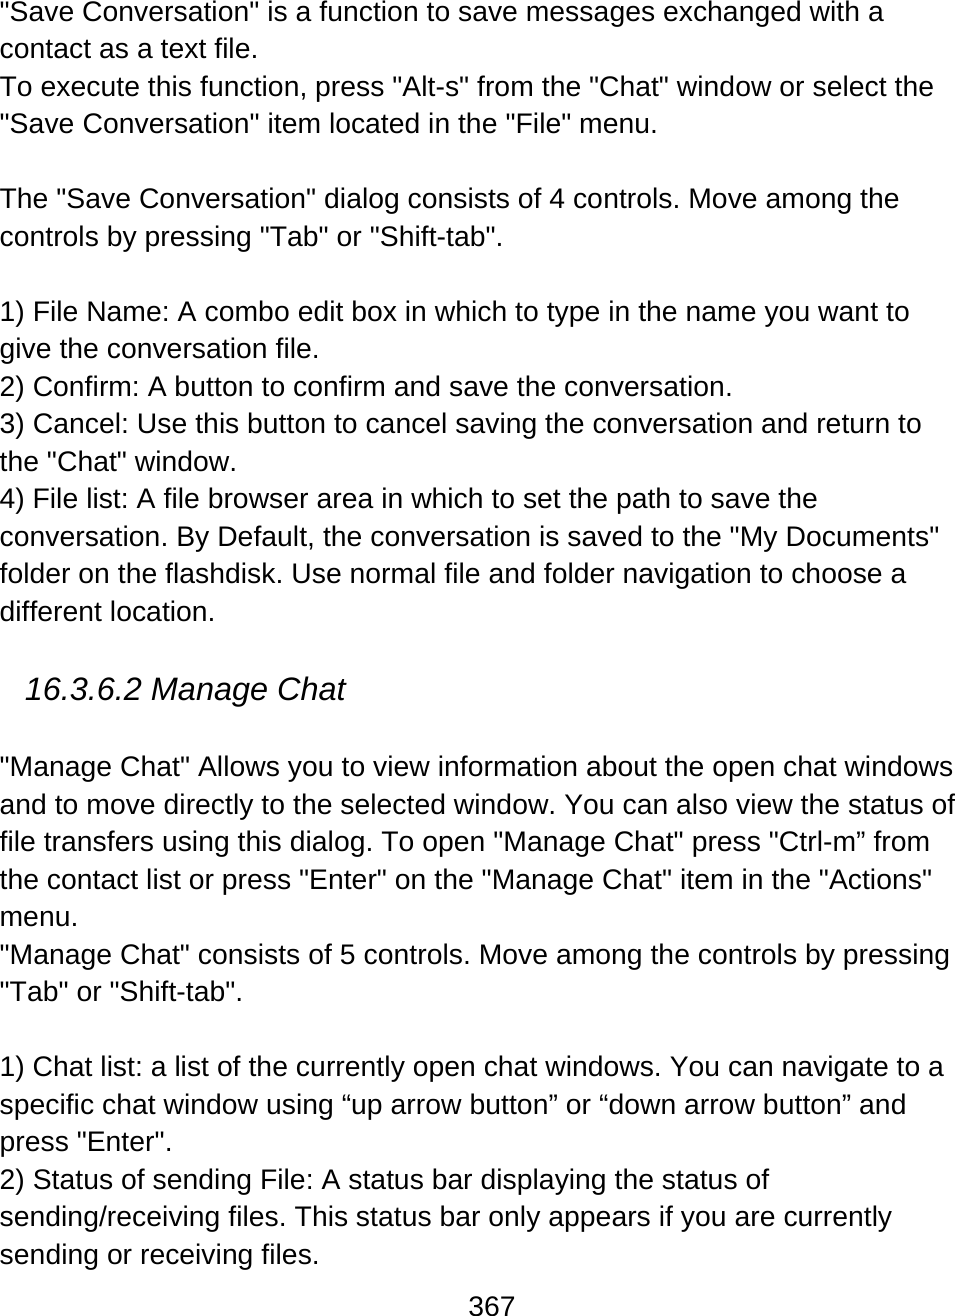 367  &quot;Save Conversation&quot; is a function to save messages exchanged with a  contact as a text file. To execute this function, press &quot;Alt-s&quot; from the &quot;Chat&quot; window or select the &quot;Save Conversation&quot; item located in the &quot;File&quot; menu.  The &quot;Save Conversation&quot; dialog consists of 4 controls. Move among the controls by pressing &quot;Tab&quot; or &quot;Shift-tab&quot;.   1) File Name: A combo edit box in which to type in the name you want to give the conversation file.  2) Confirm: A button to confirm and save the conversation.  3) Cancel: Use this button to cancel saving the conversation and return to the &quot;Chat&quot; window.  4) File list: A file browser area in which to set the path to save the conversation. By Default, the conversation is saved to the &quot;My Documents&quot; folder on the flashdisk. Use normal file and folder navigation to choose a different location.    16.3.6.2 Manage Chat   &quot;Manage Chat&quot; Allows you to view information about the open chat windows and to move directly to the selected window. You can also view the status of file transfers using this dialog. To open &quot;Manage Chat&quot; press &quot;Ctrl-m” from the contact list or press &quot;Enter&quot; on the &quot;Manage Chat&quot; item in the &quot;Actions&quot; menu. &quot;Manage Chat&quot; consists of 5 controls. Move among the controls by pressing &quot;Tab&quot; or &quot;Shift-tab&quot;.  1) Chat list: a list of the currently open chat windows. You can navigate to a specific chat window using “up arrow button” or “down arrow button” and press &quot;Enter&quot;.  2) Status of sending File: A status bar displaying the status of sending/receiving files. This status bar only appears if you are currently sending or receiving files. 